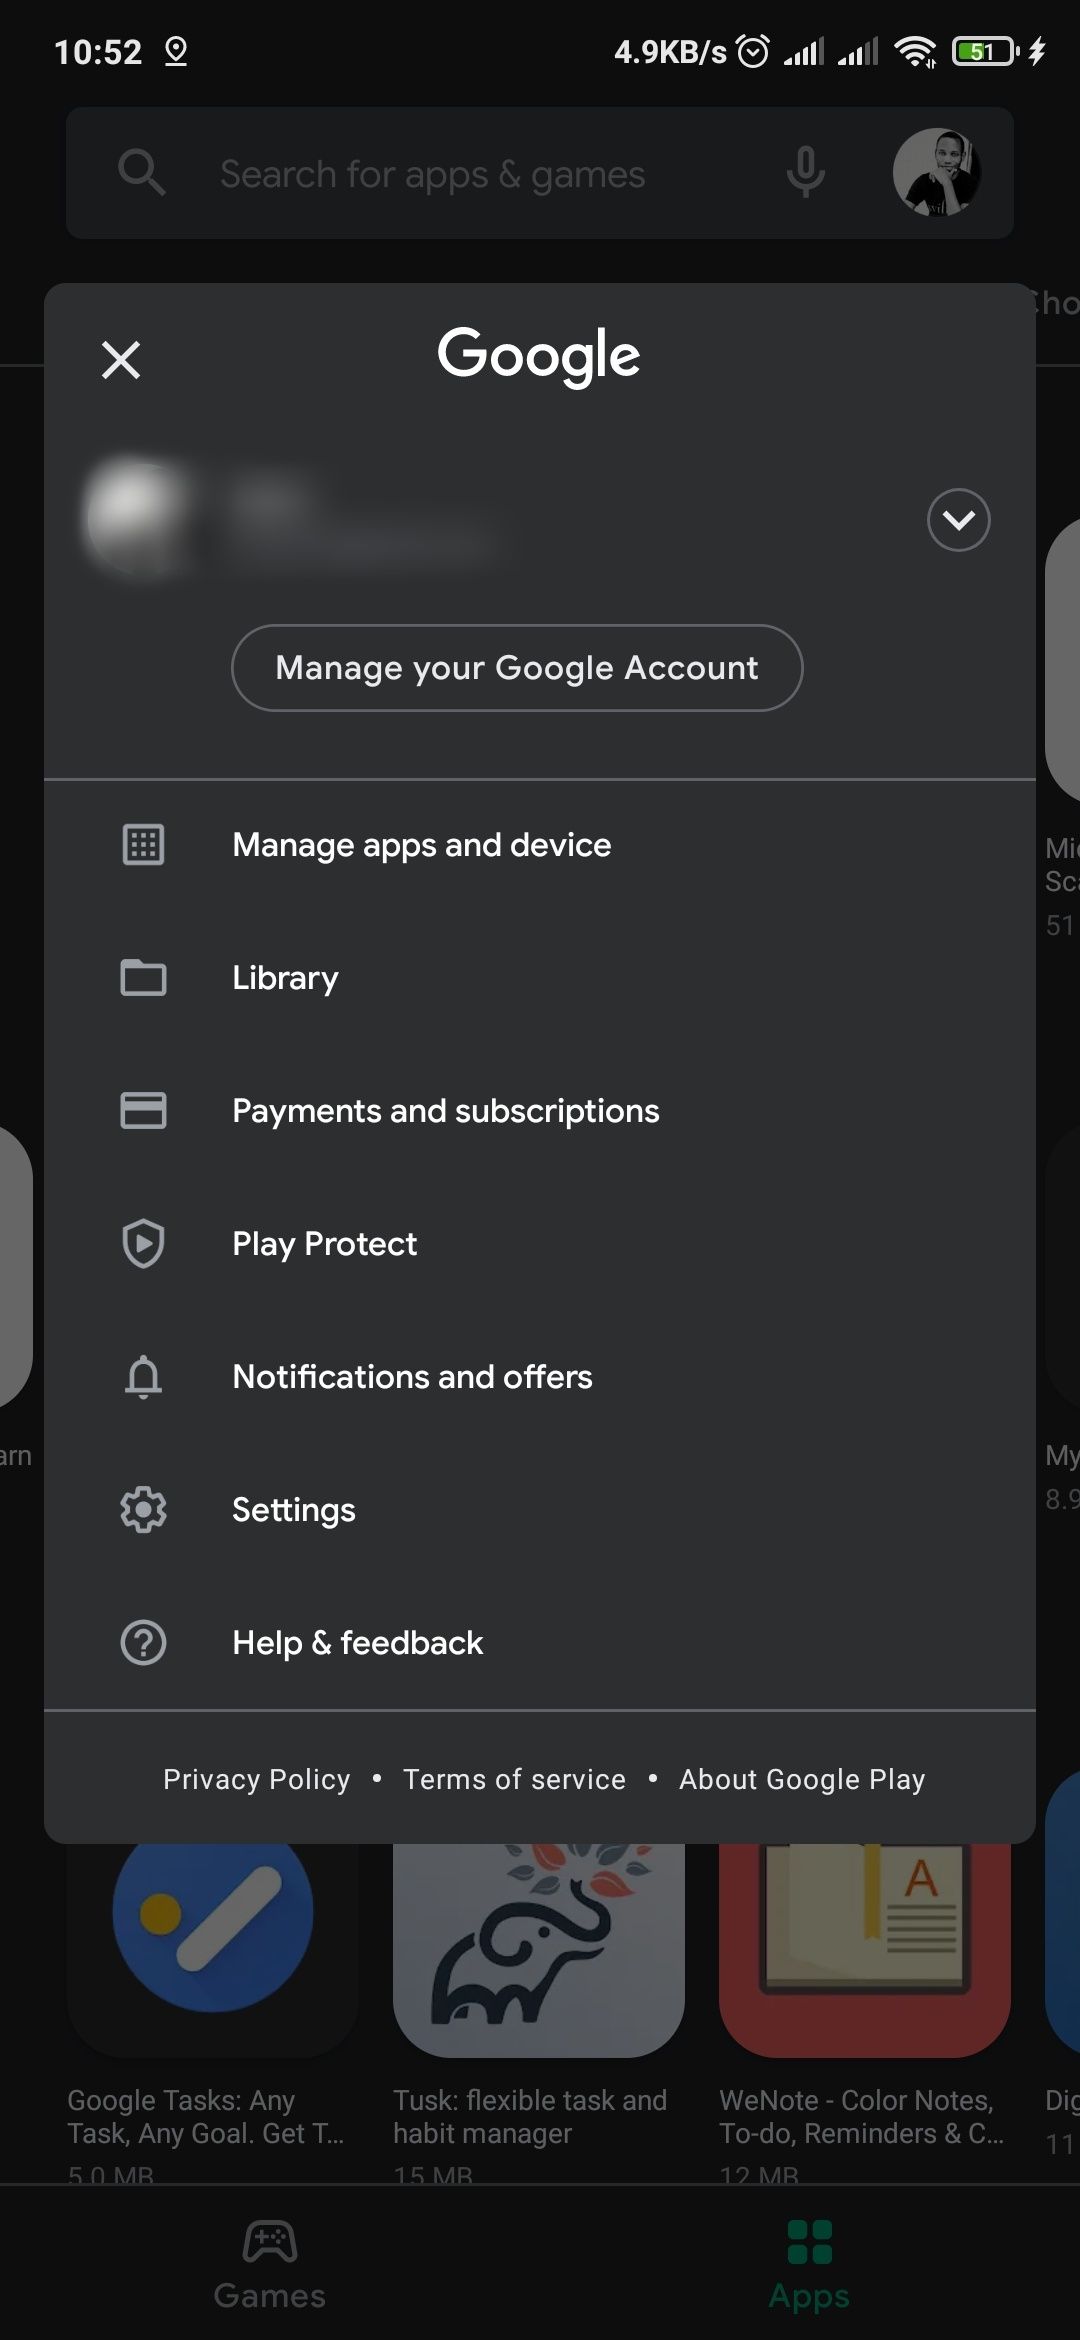 The new menu section in Google Play Store